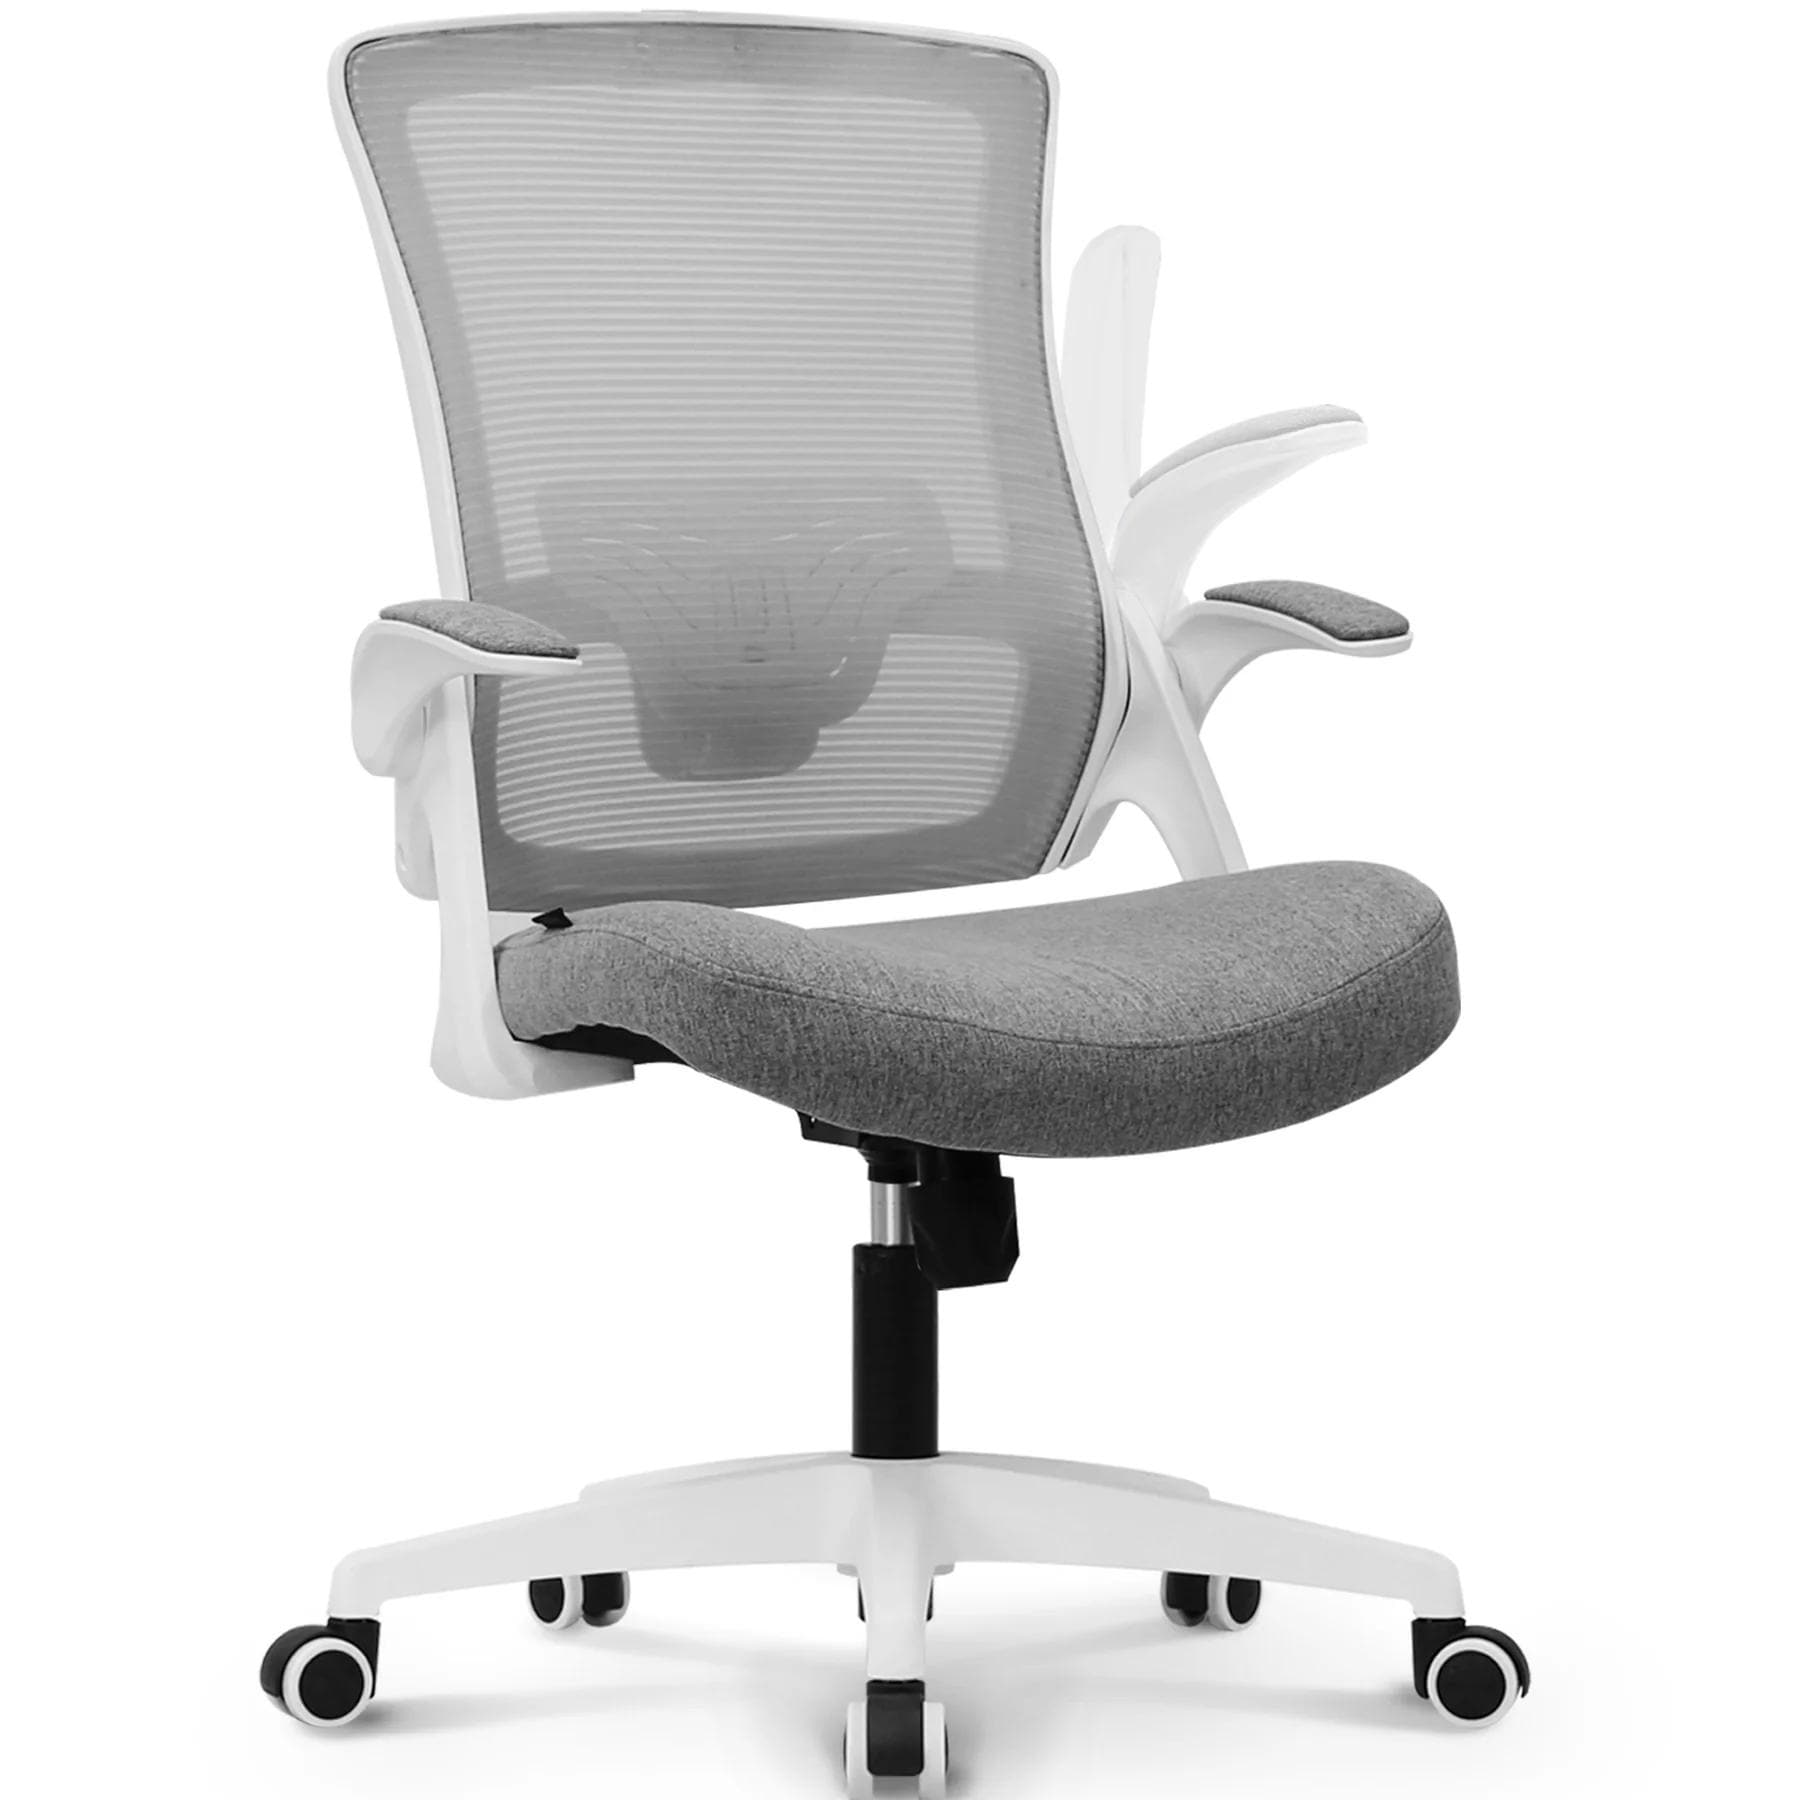 https://ak1.ostkcdn.com/images/products/is/images/direct/0562e5bc175c22a1a18c84ebdede621c50118d61/Neo-Ergonomic-Office-Chair-with-Flip-up-Arms-and-Adjustable-Headrest.jpg